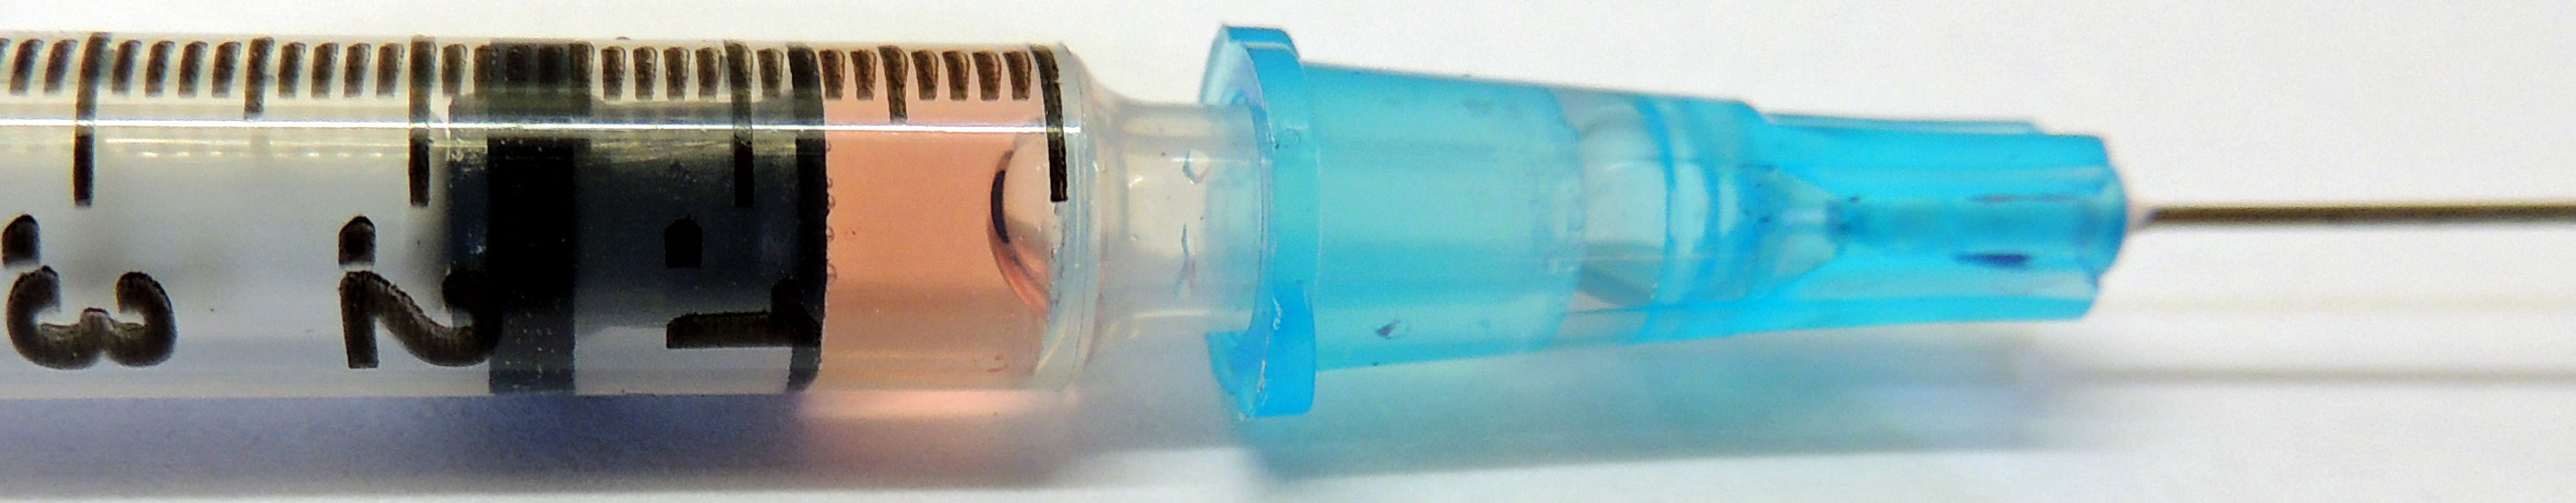 Figure 3. The dead space volume after ejecting all the fluid noted in Figure 2 and then withdrawing air to pull the dead space volume back into the syringe, here showing 0.08 mL.